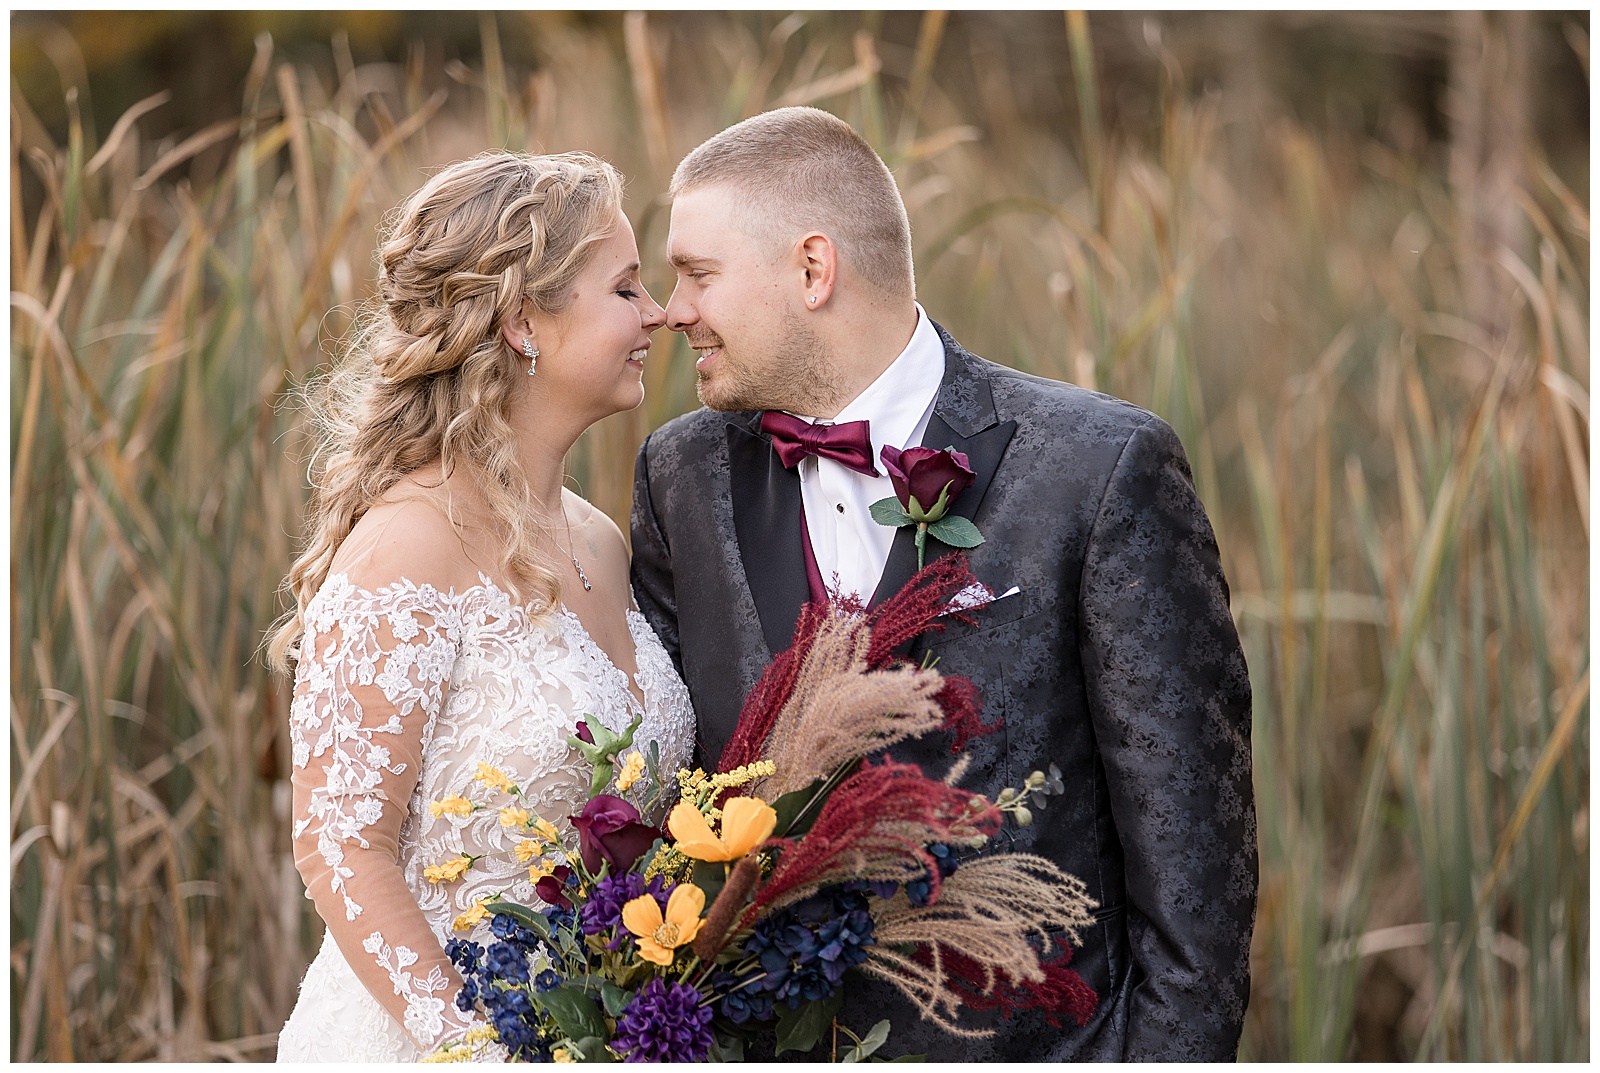 just married couple touching noses and smiling by brown corn stalks at walnut grove farms